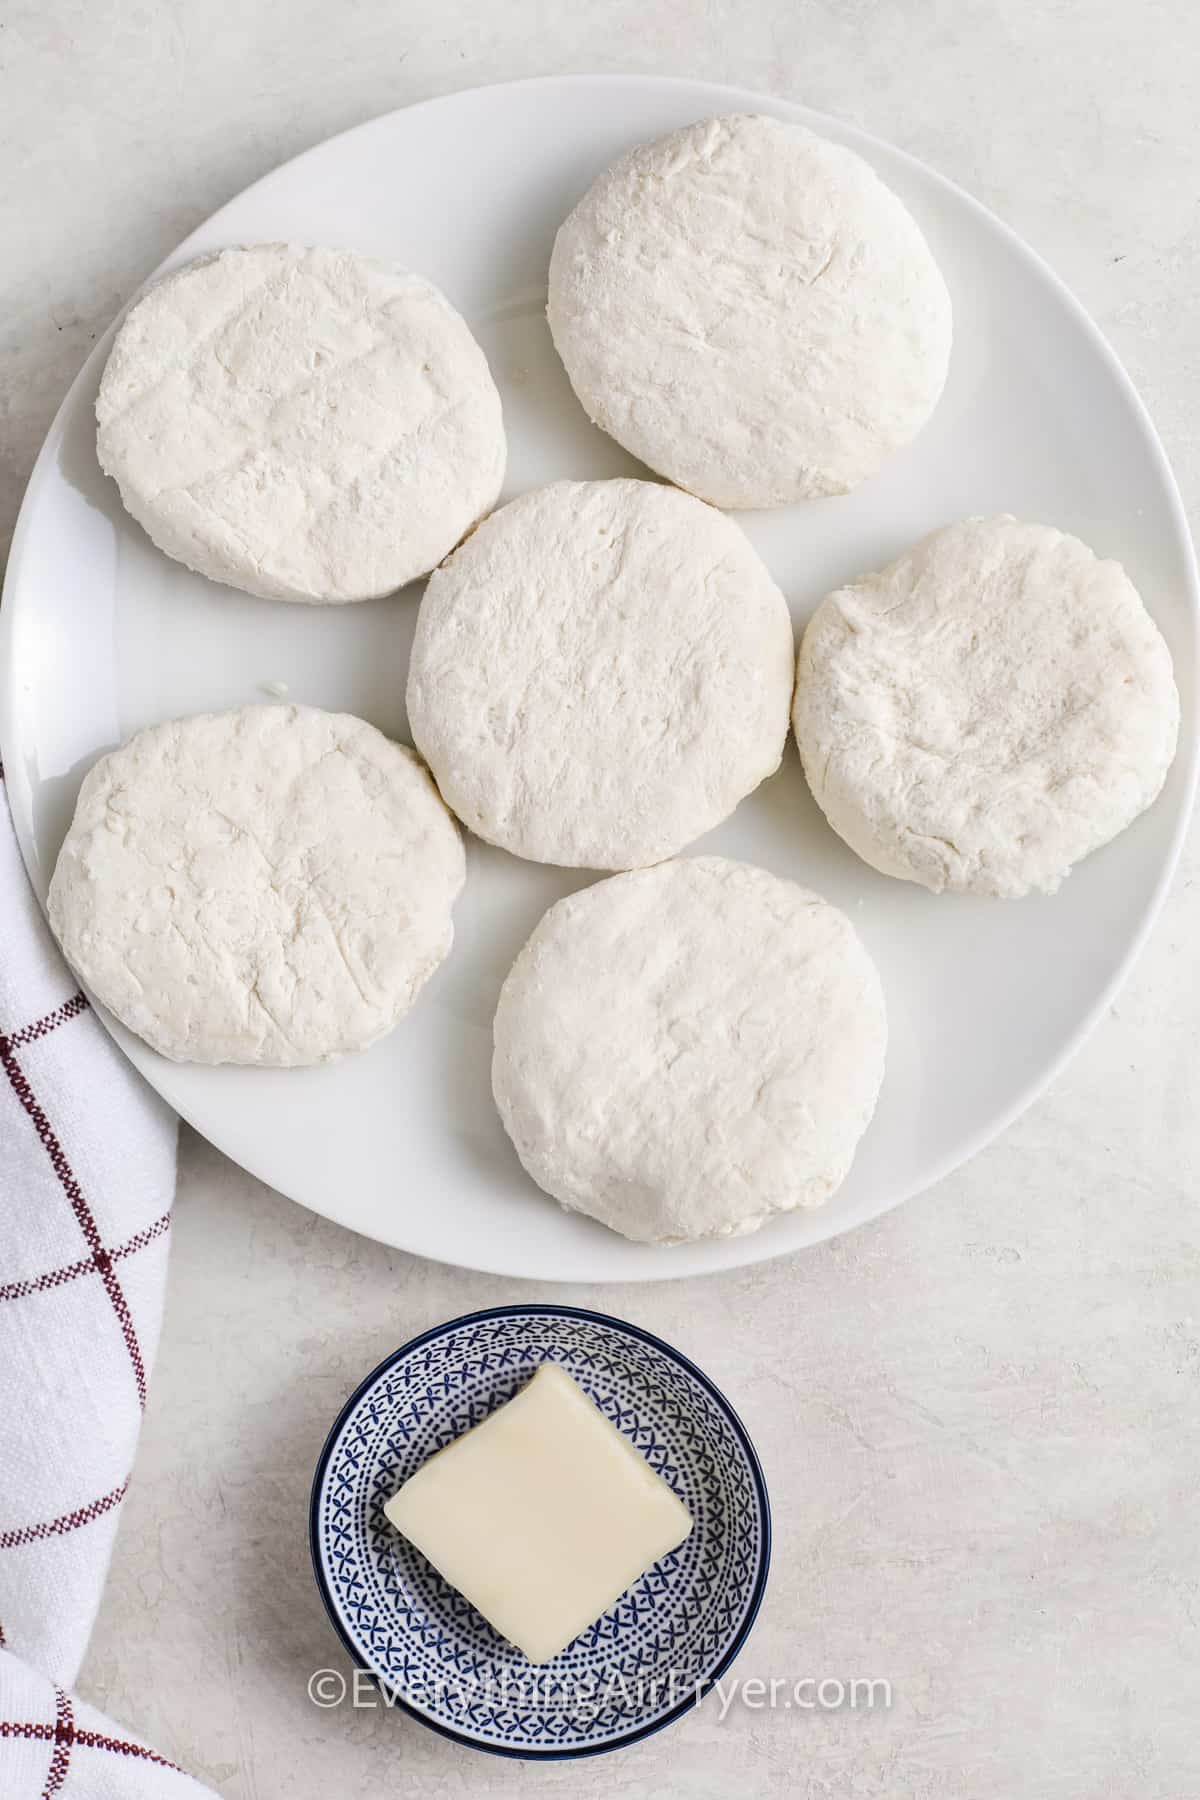 Frozen biscuits on a plate